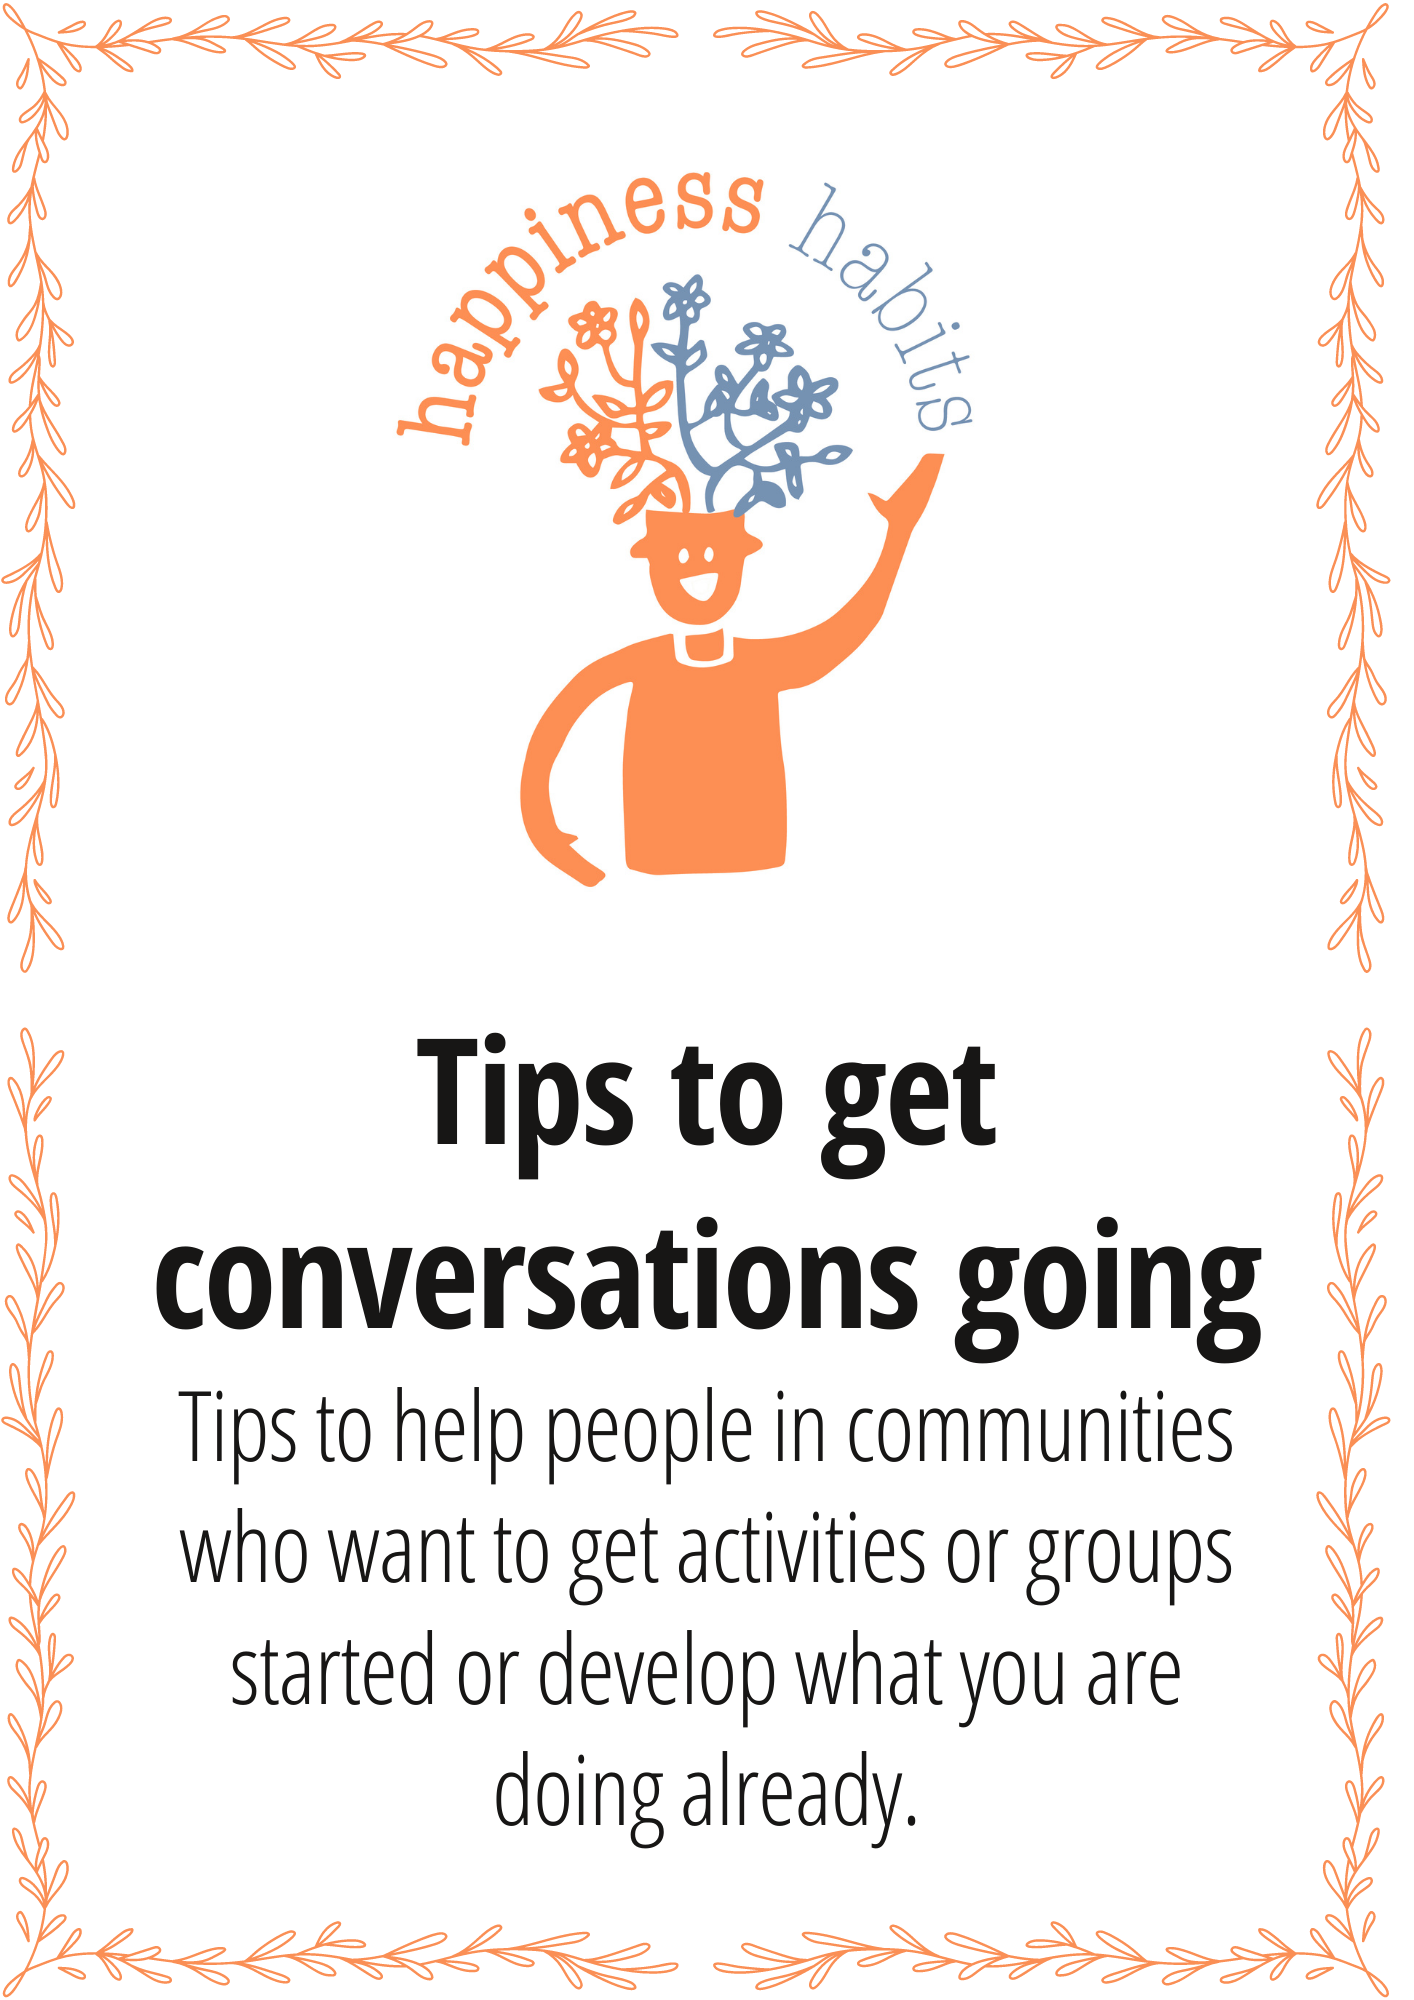 Tips to get conversations going. Tips to help people in communities who want to get activities or groups started or develop what you are doing already.